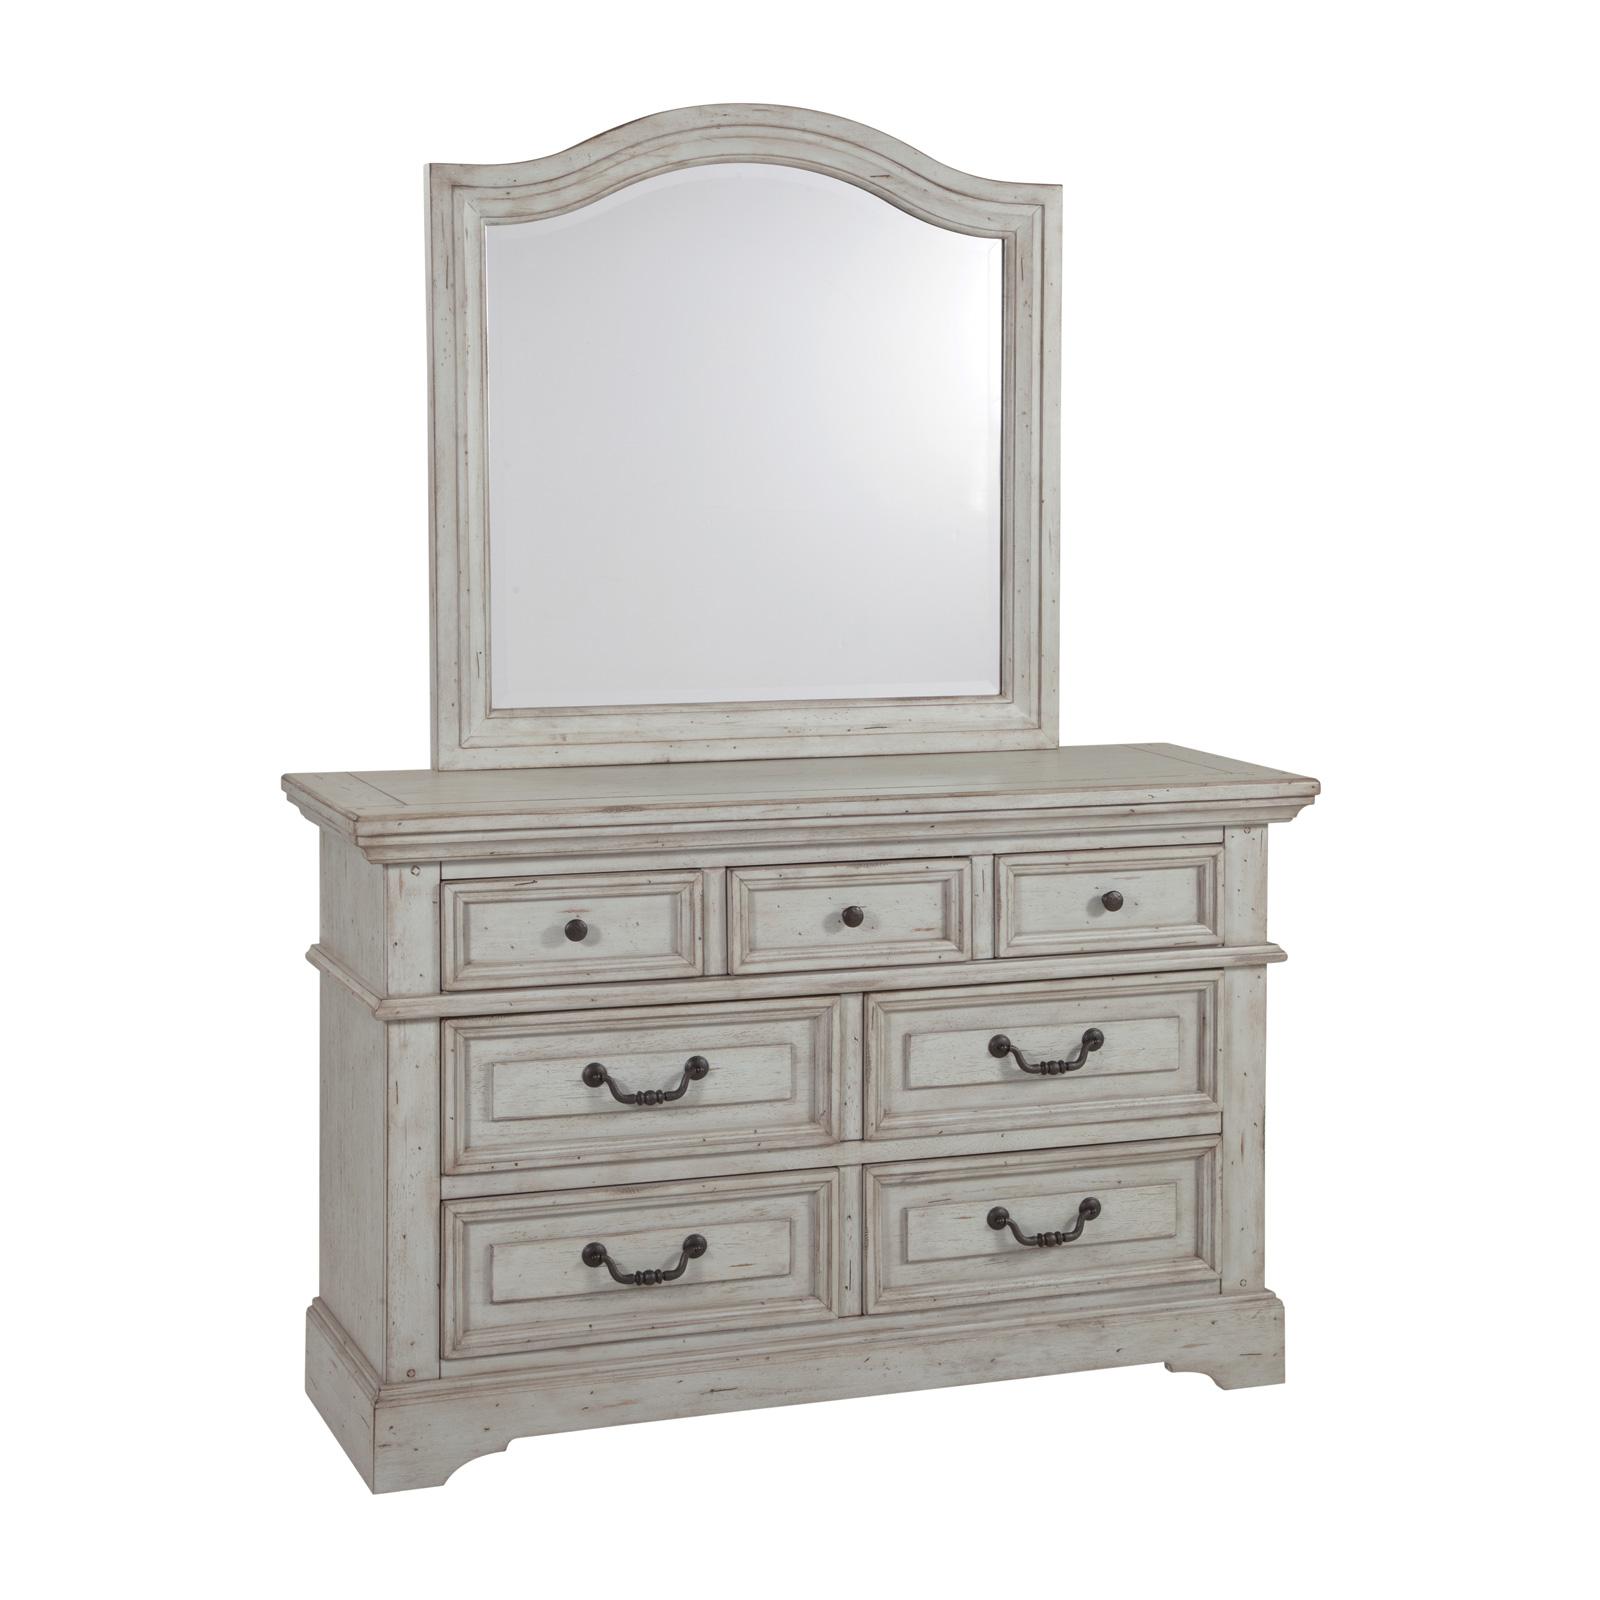 Classic, Traditional Dresser With Mirror 7820 STONEBROOK 7820-DLM in Antique, Gray 